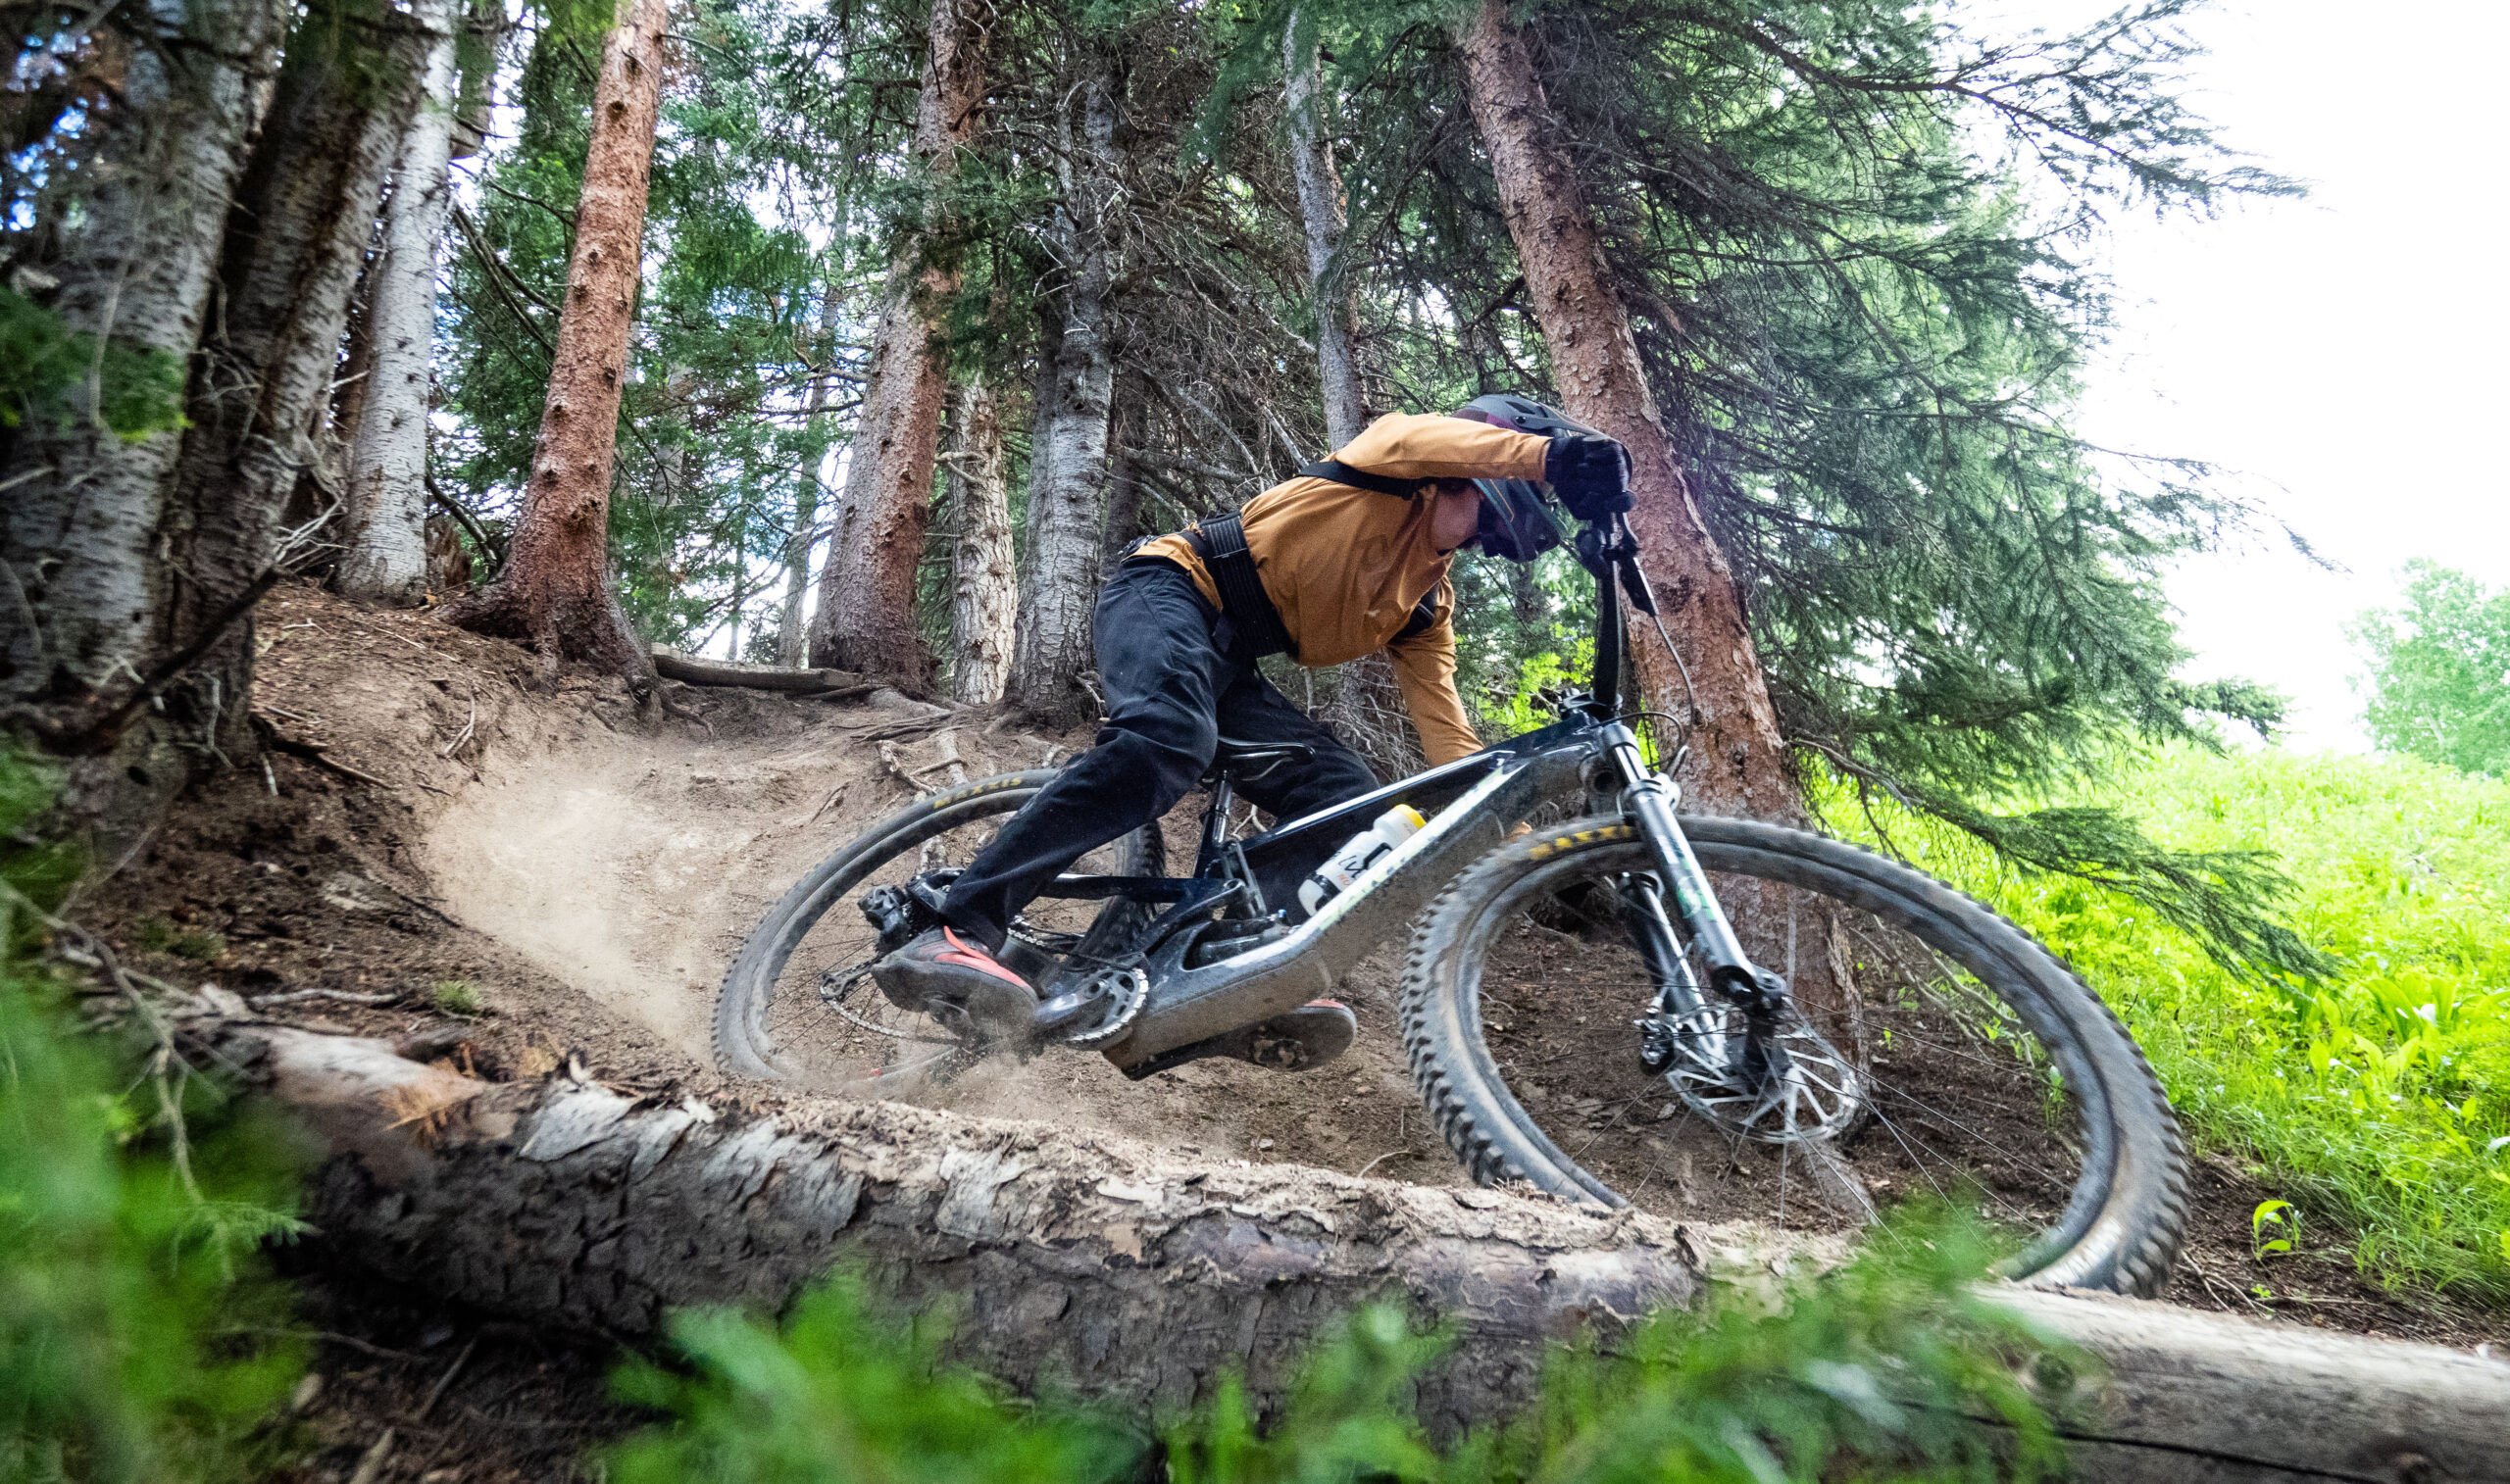 David Golay and Dylan Wood review the Santa Cruz Megatower for Blister